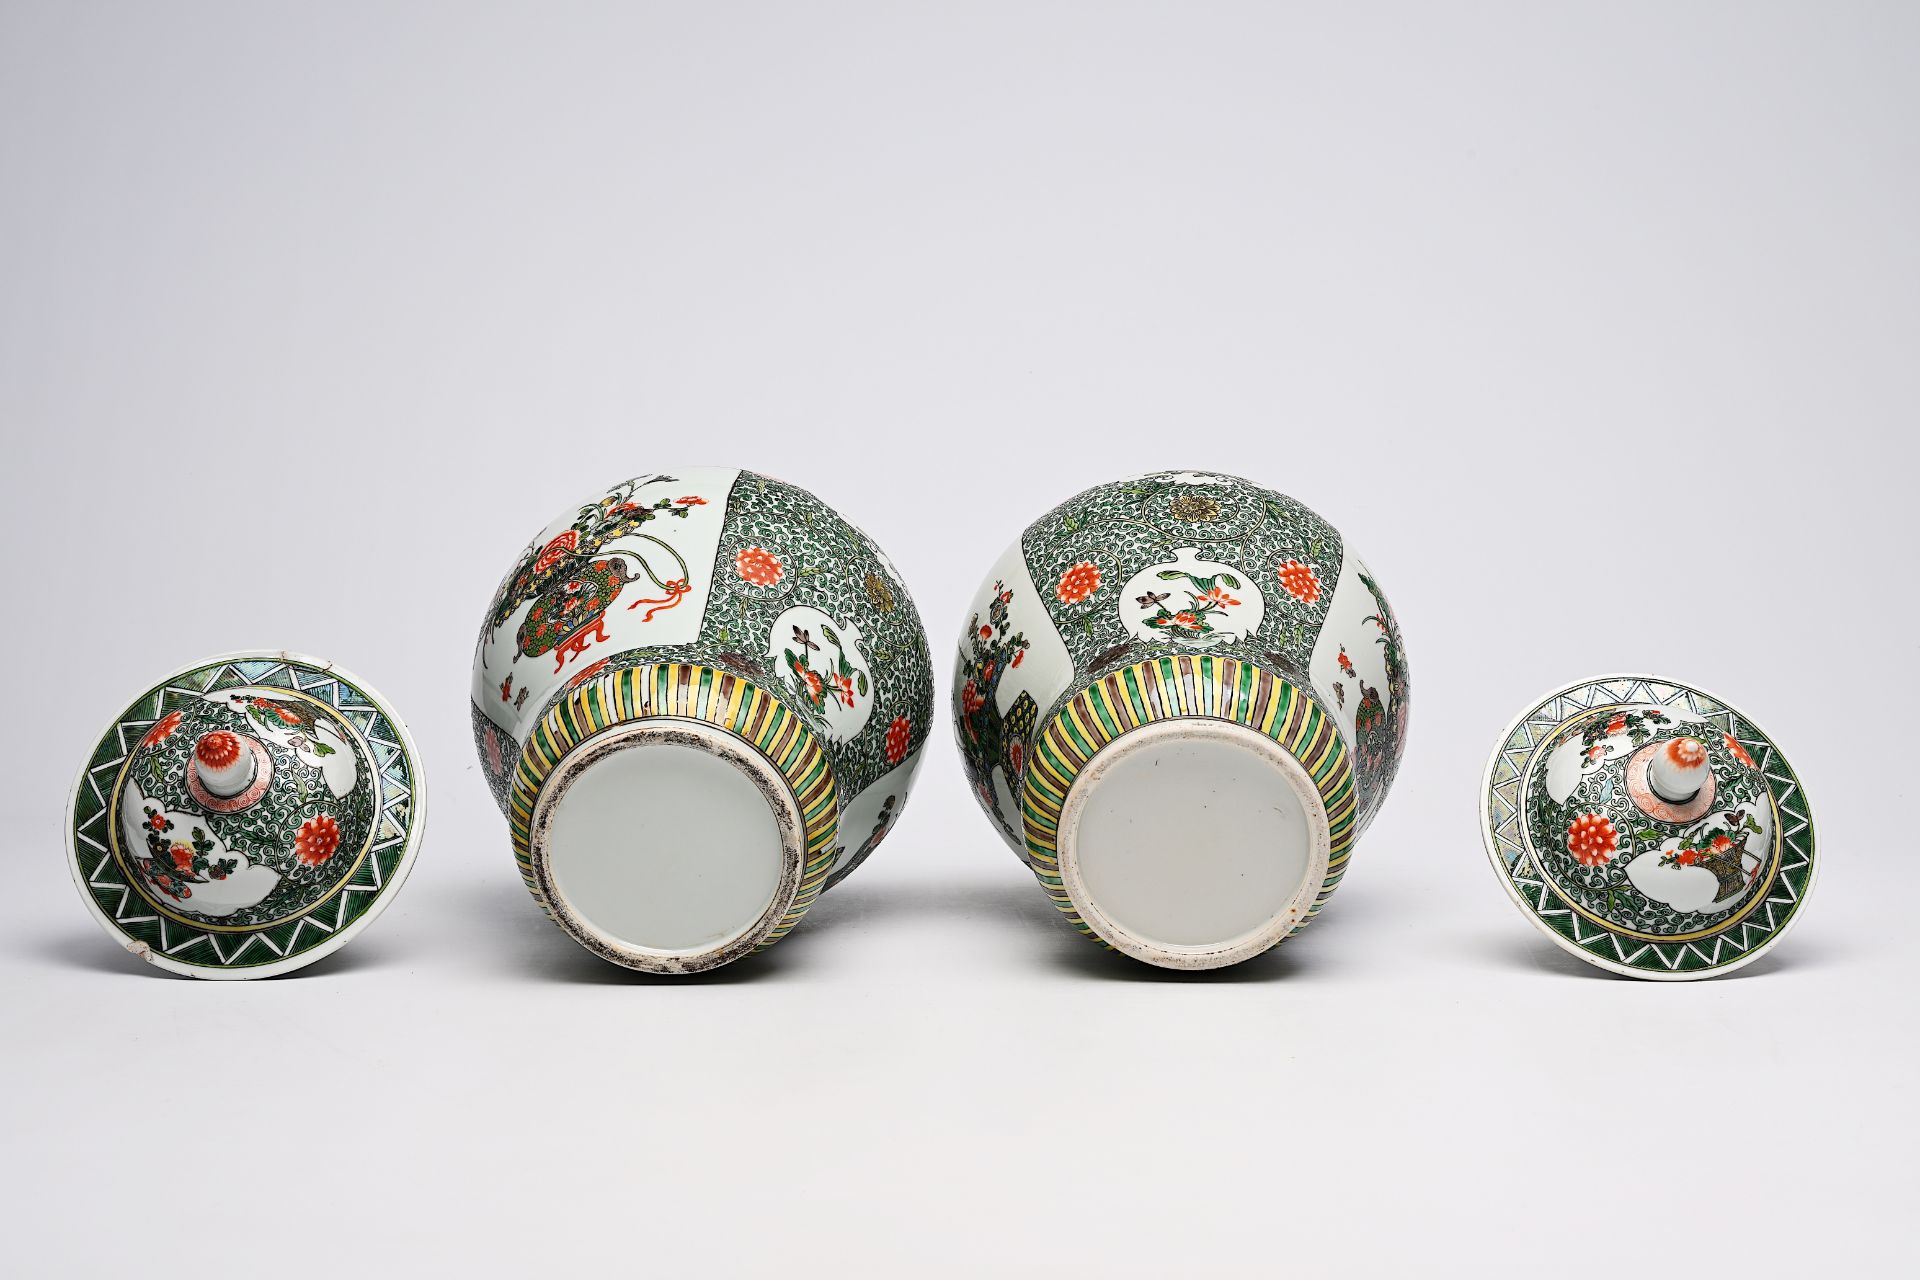 A pair of Chinese famille verte vases and covers with flower baskets and floral design, 19th C. - Image 11 of 16